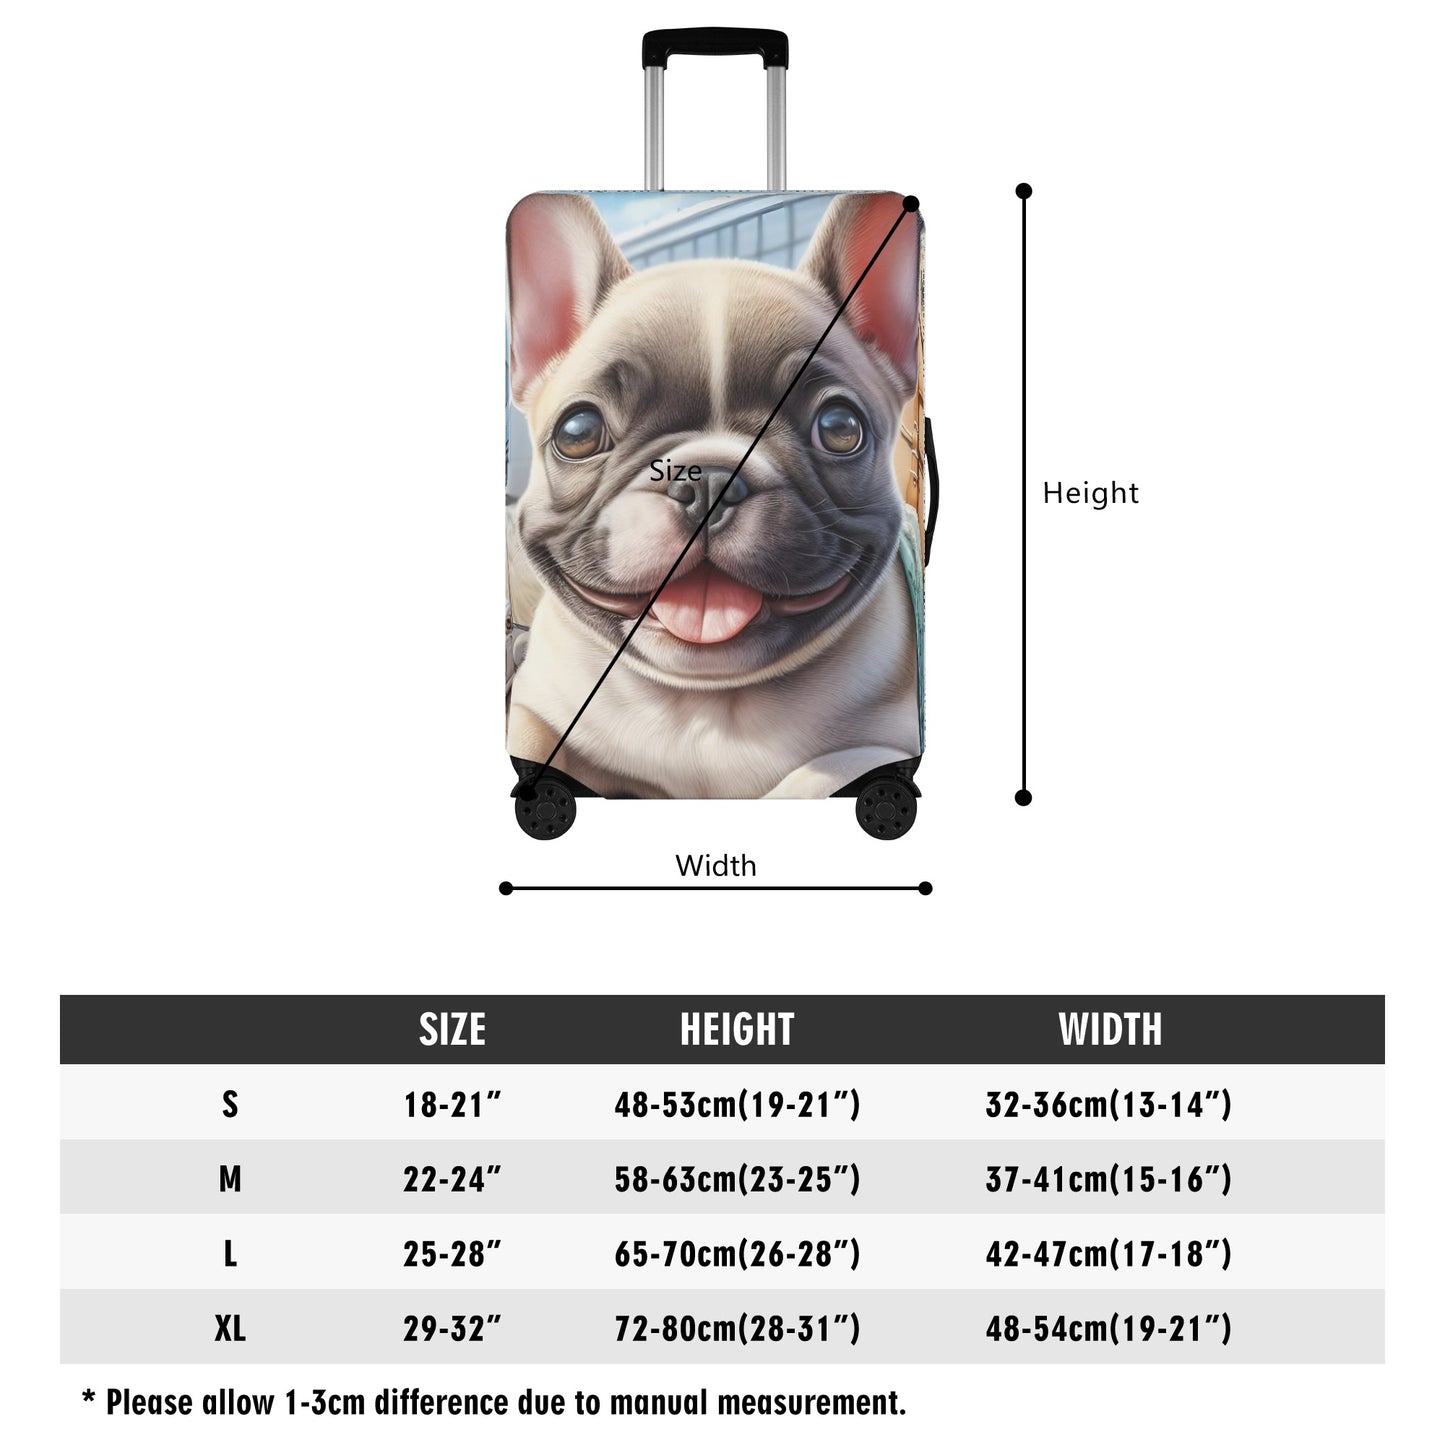 Rex  - Luggage Cover